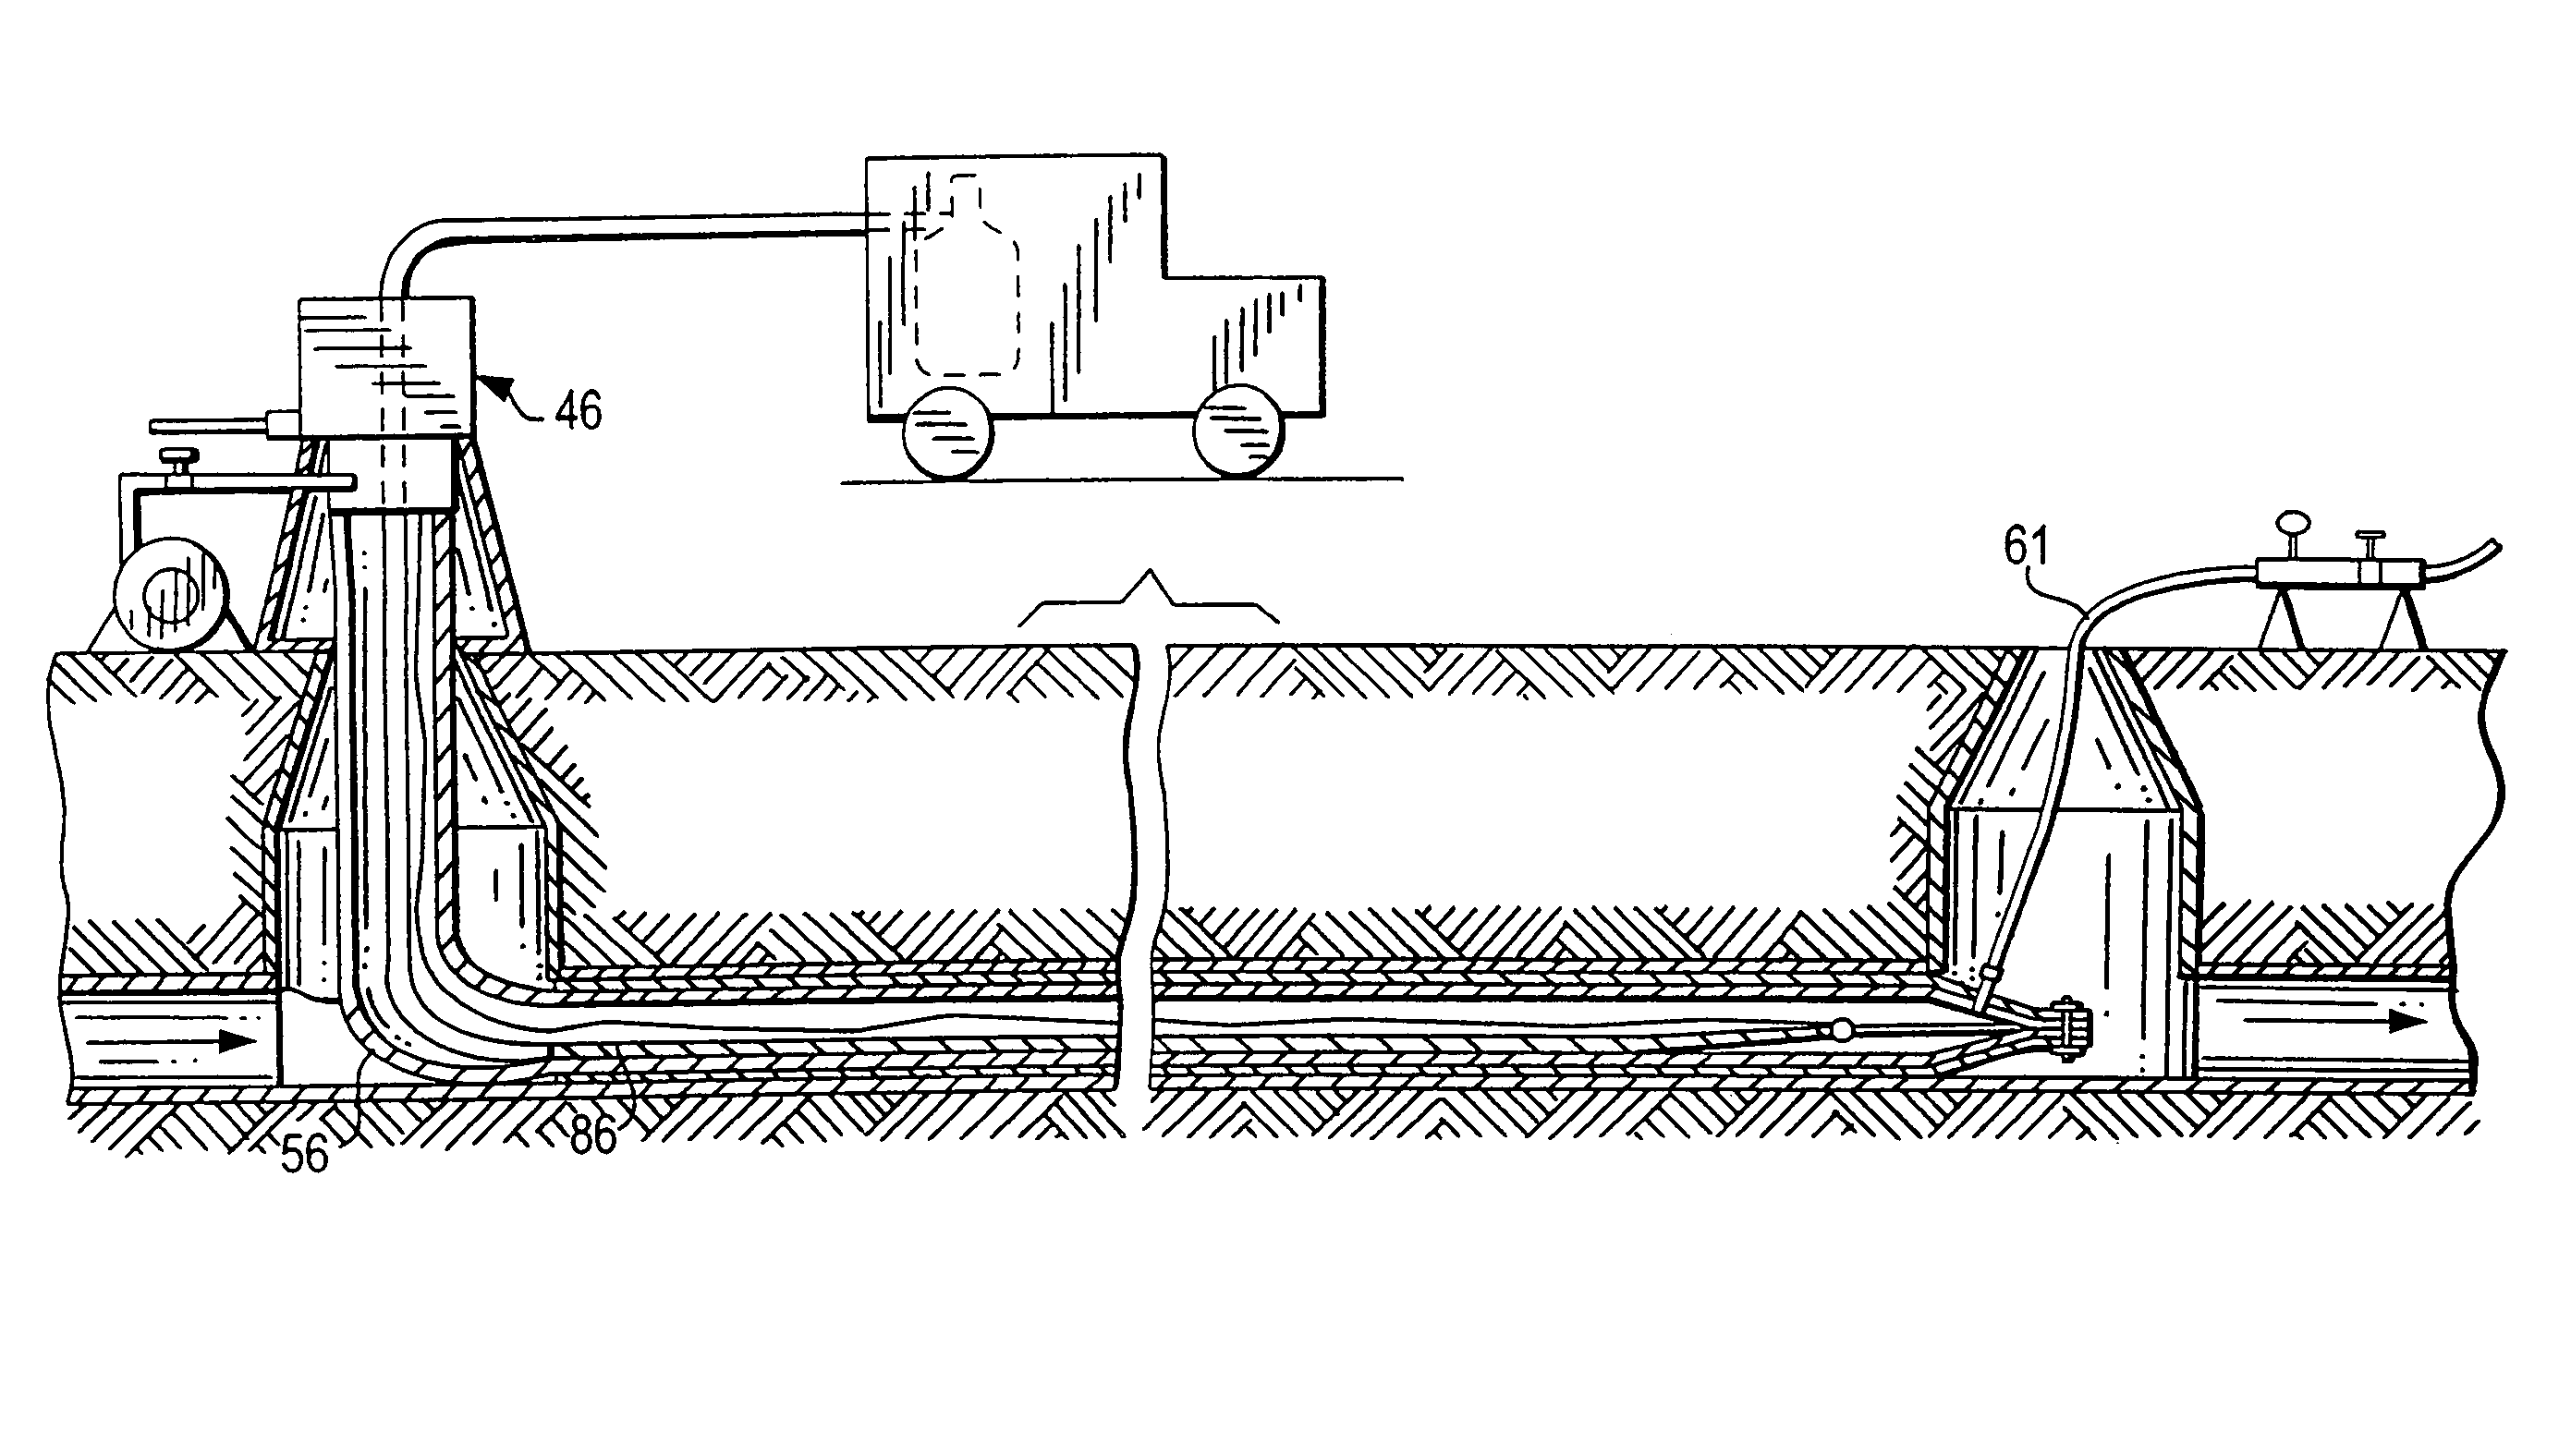 Exhaust and/or condensate port for cured in place liners and installation methods and apparatus